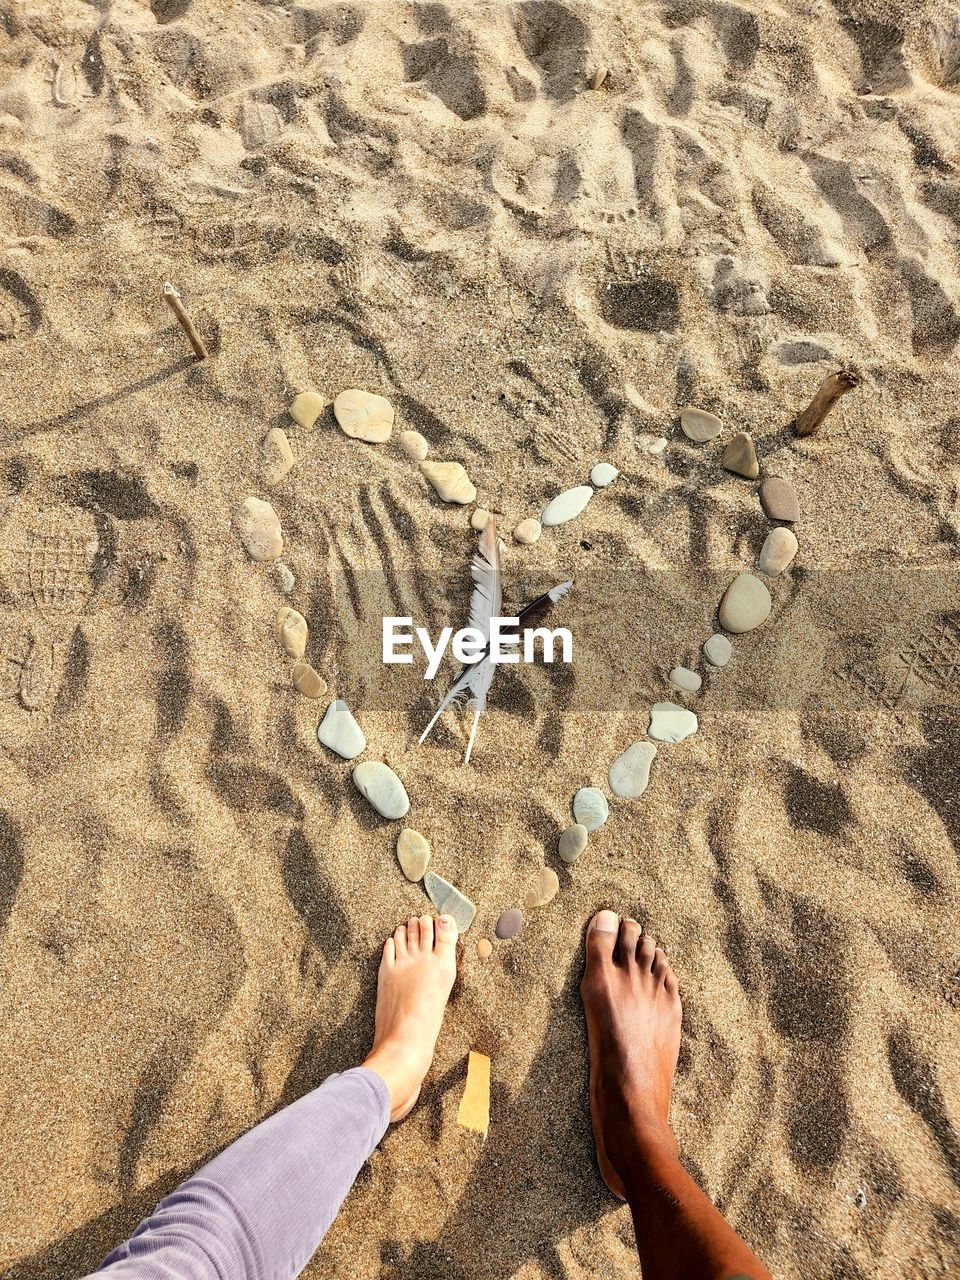 sand, beach, land, human leg, low section, high angle view, leisure activity, nature, barefoot, lifestyles, sunlight, day, one person, personal perspective, vacation, trip, holiday, human foot, footprint, soil, sea, water, outdoors, standing, adult, women, men, shoe, human limb